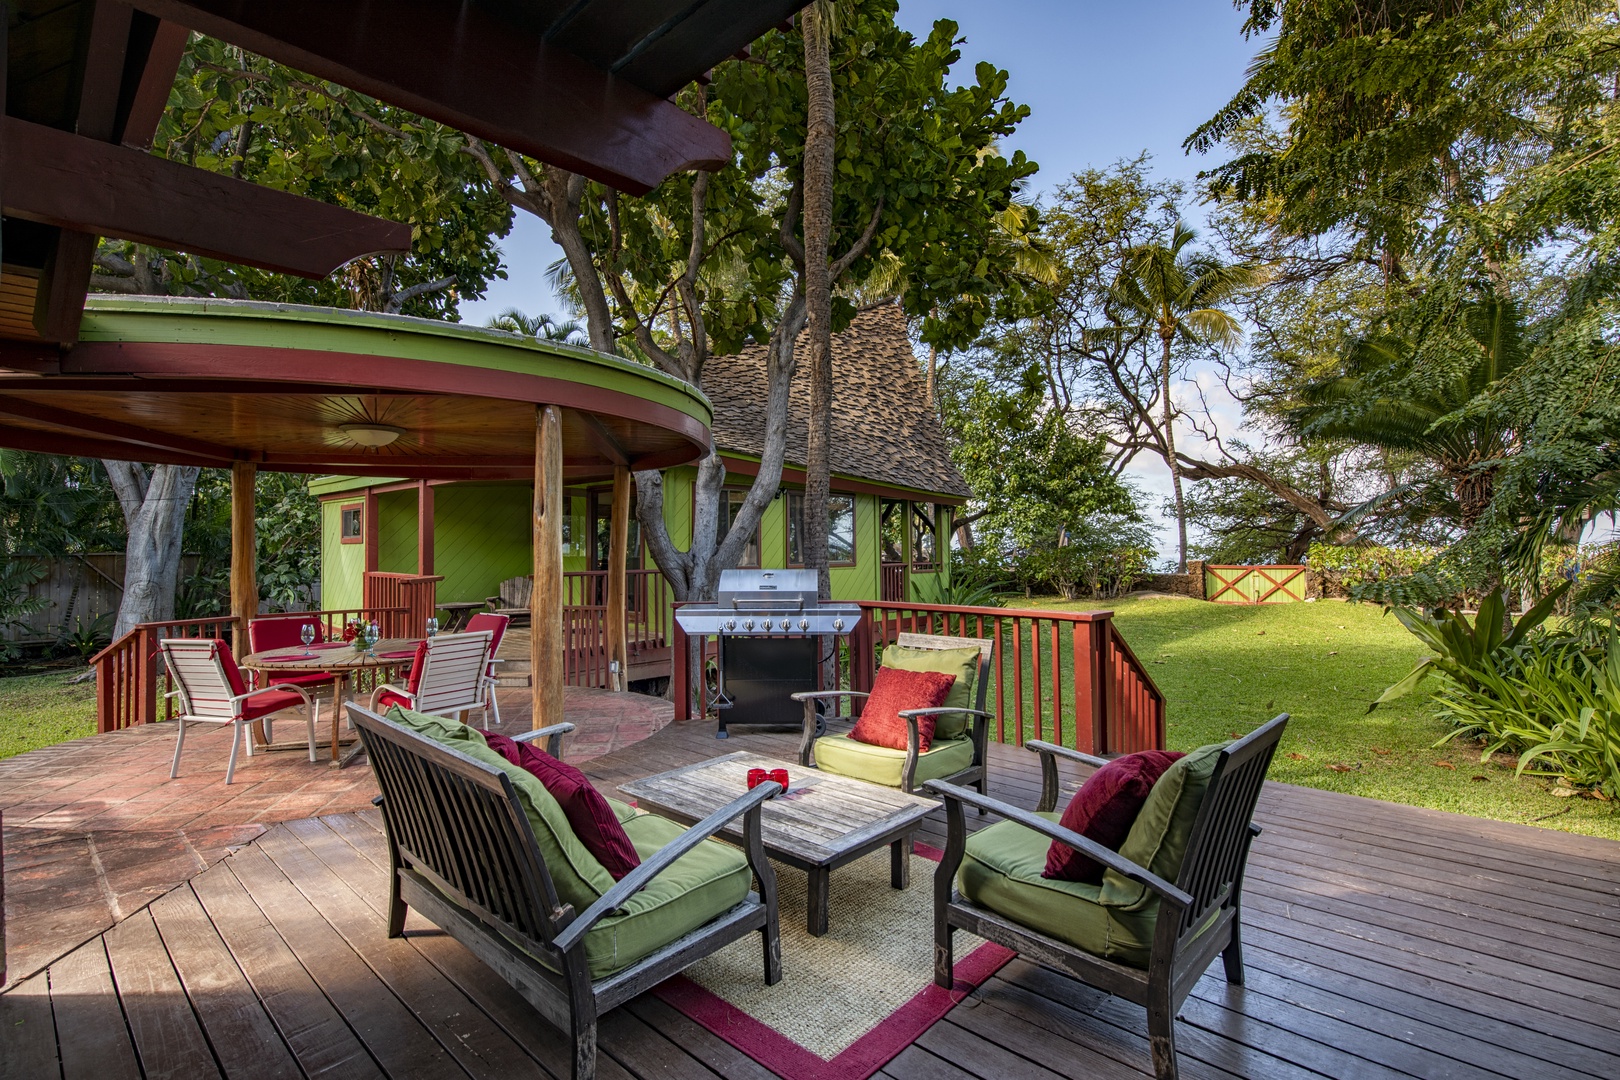 Kamuela Vacation Rentals, Hui Pu - Outdoor Lanai overlooking gardens is the perfect place to relax